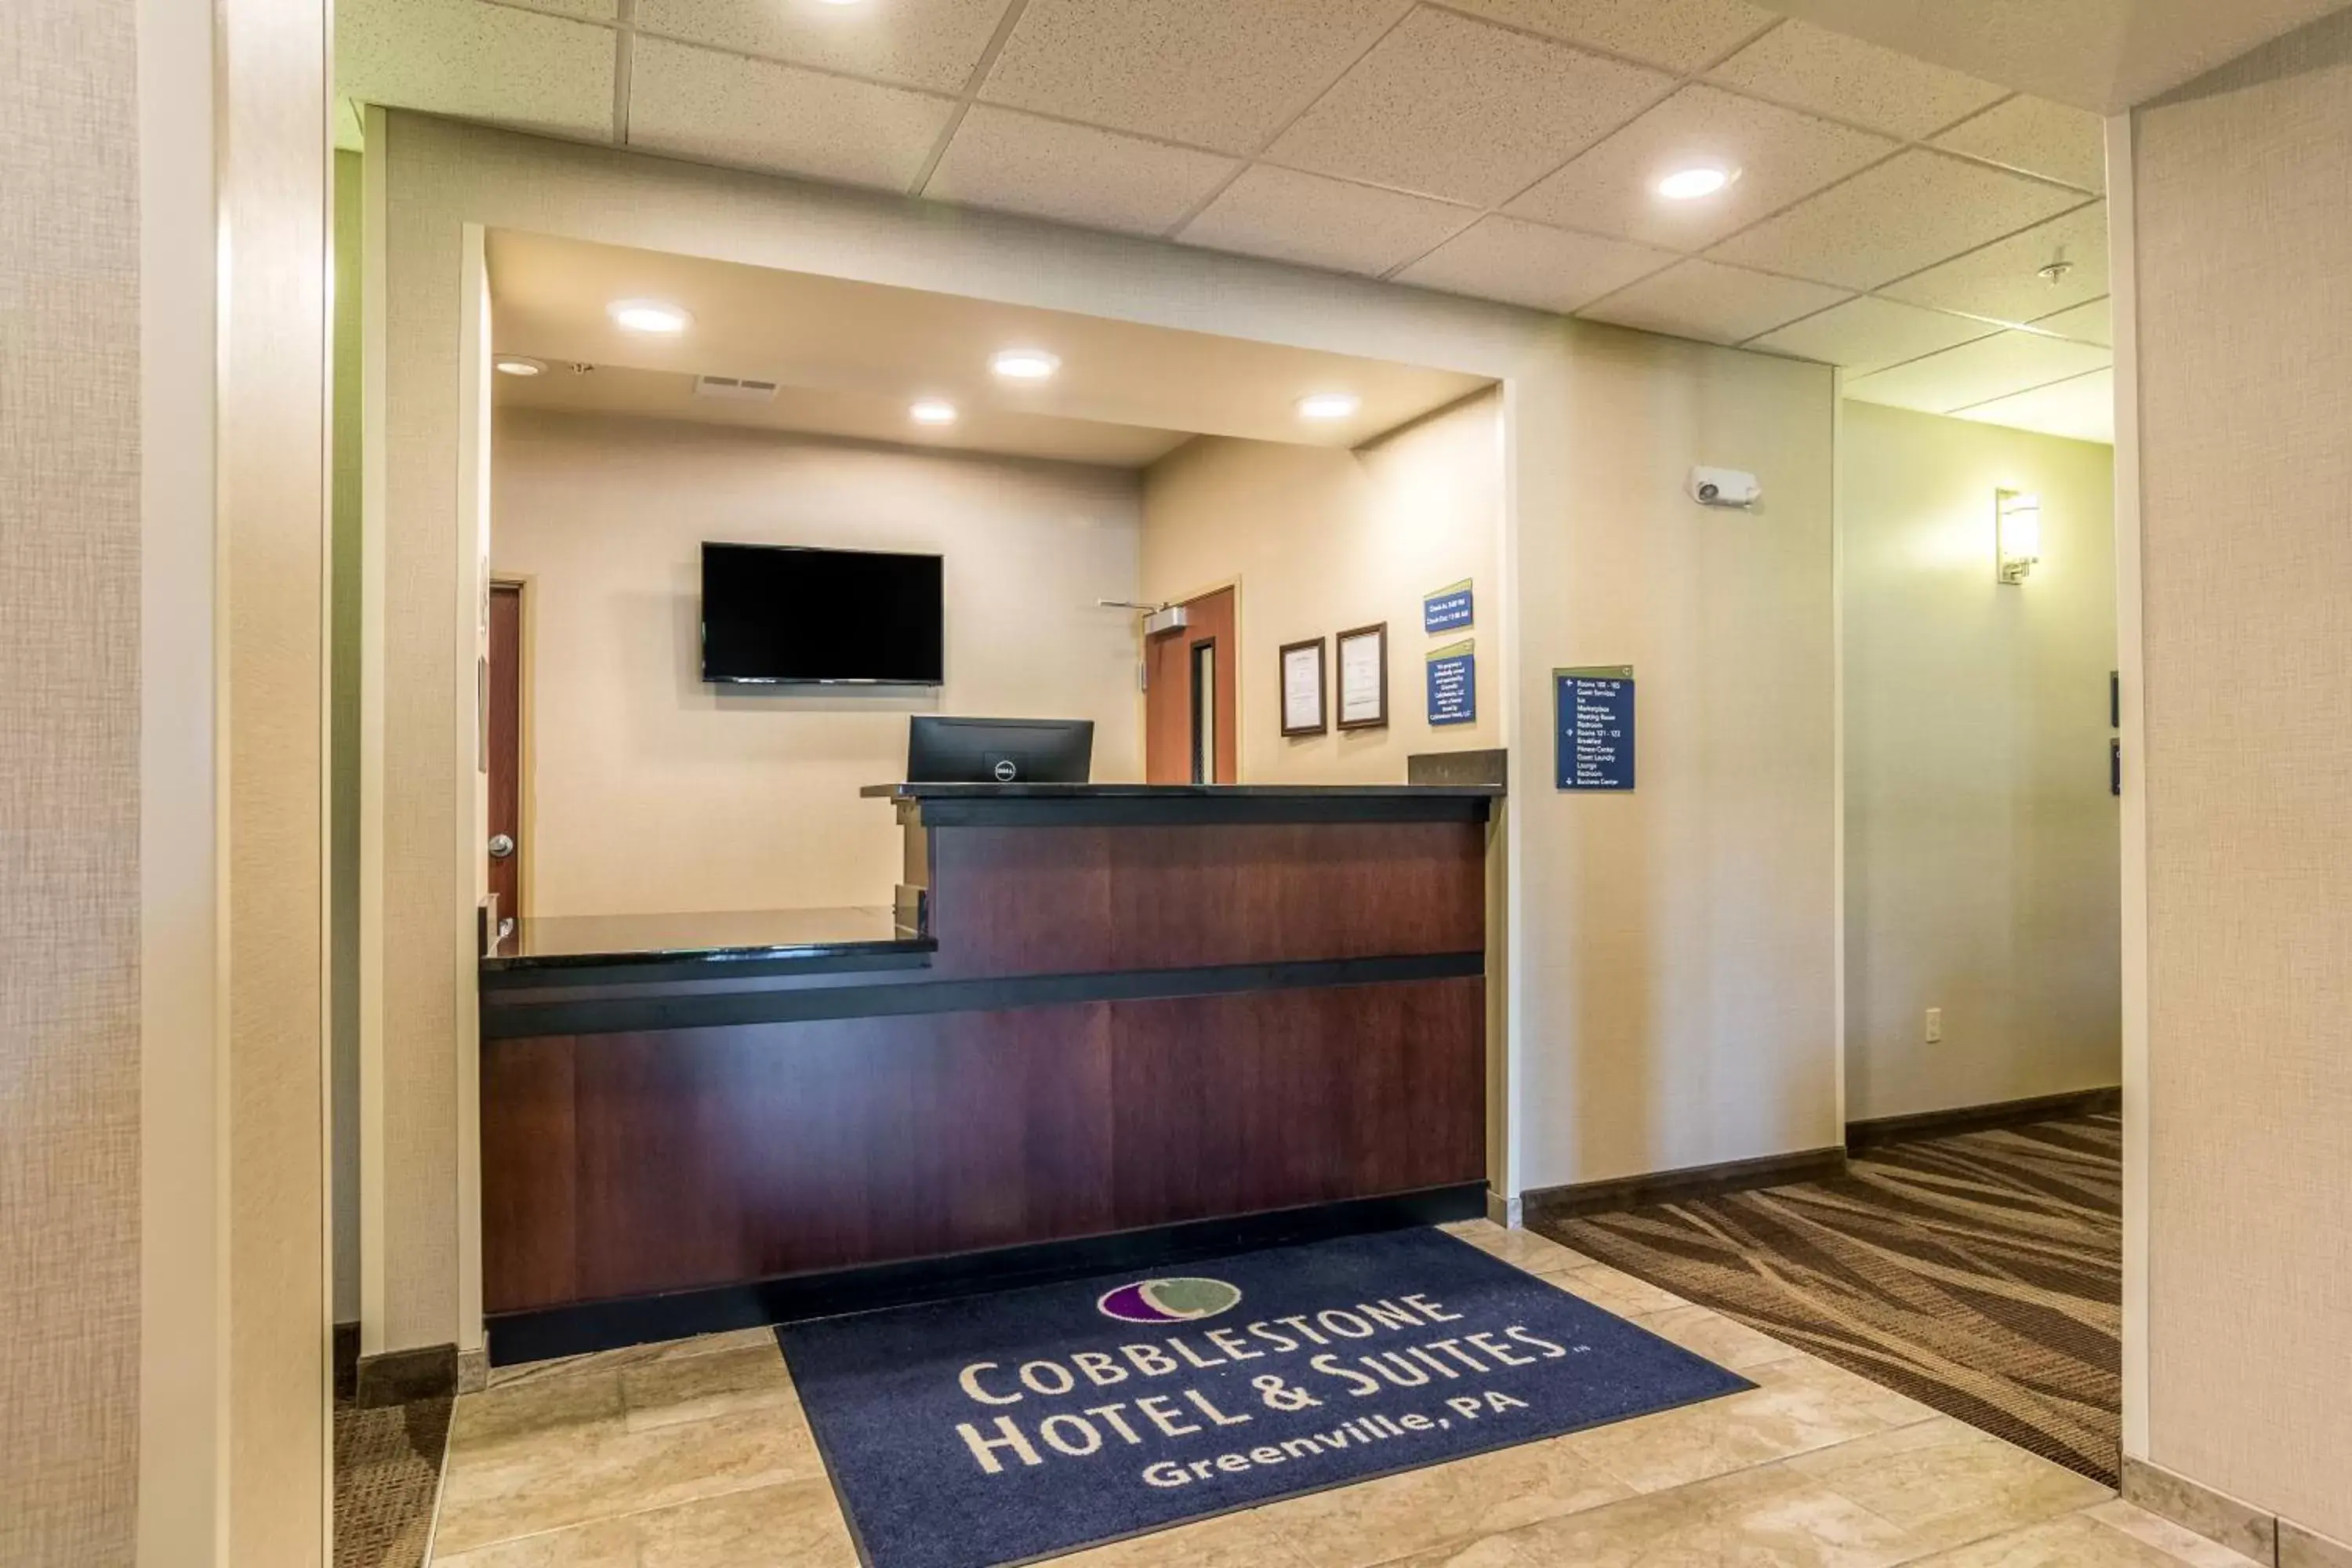 Lobby or reception in Cobblestone Hotel & Suites - Greenville